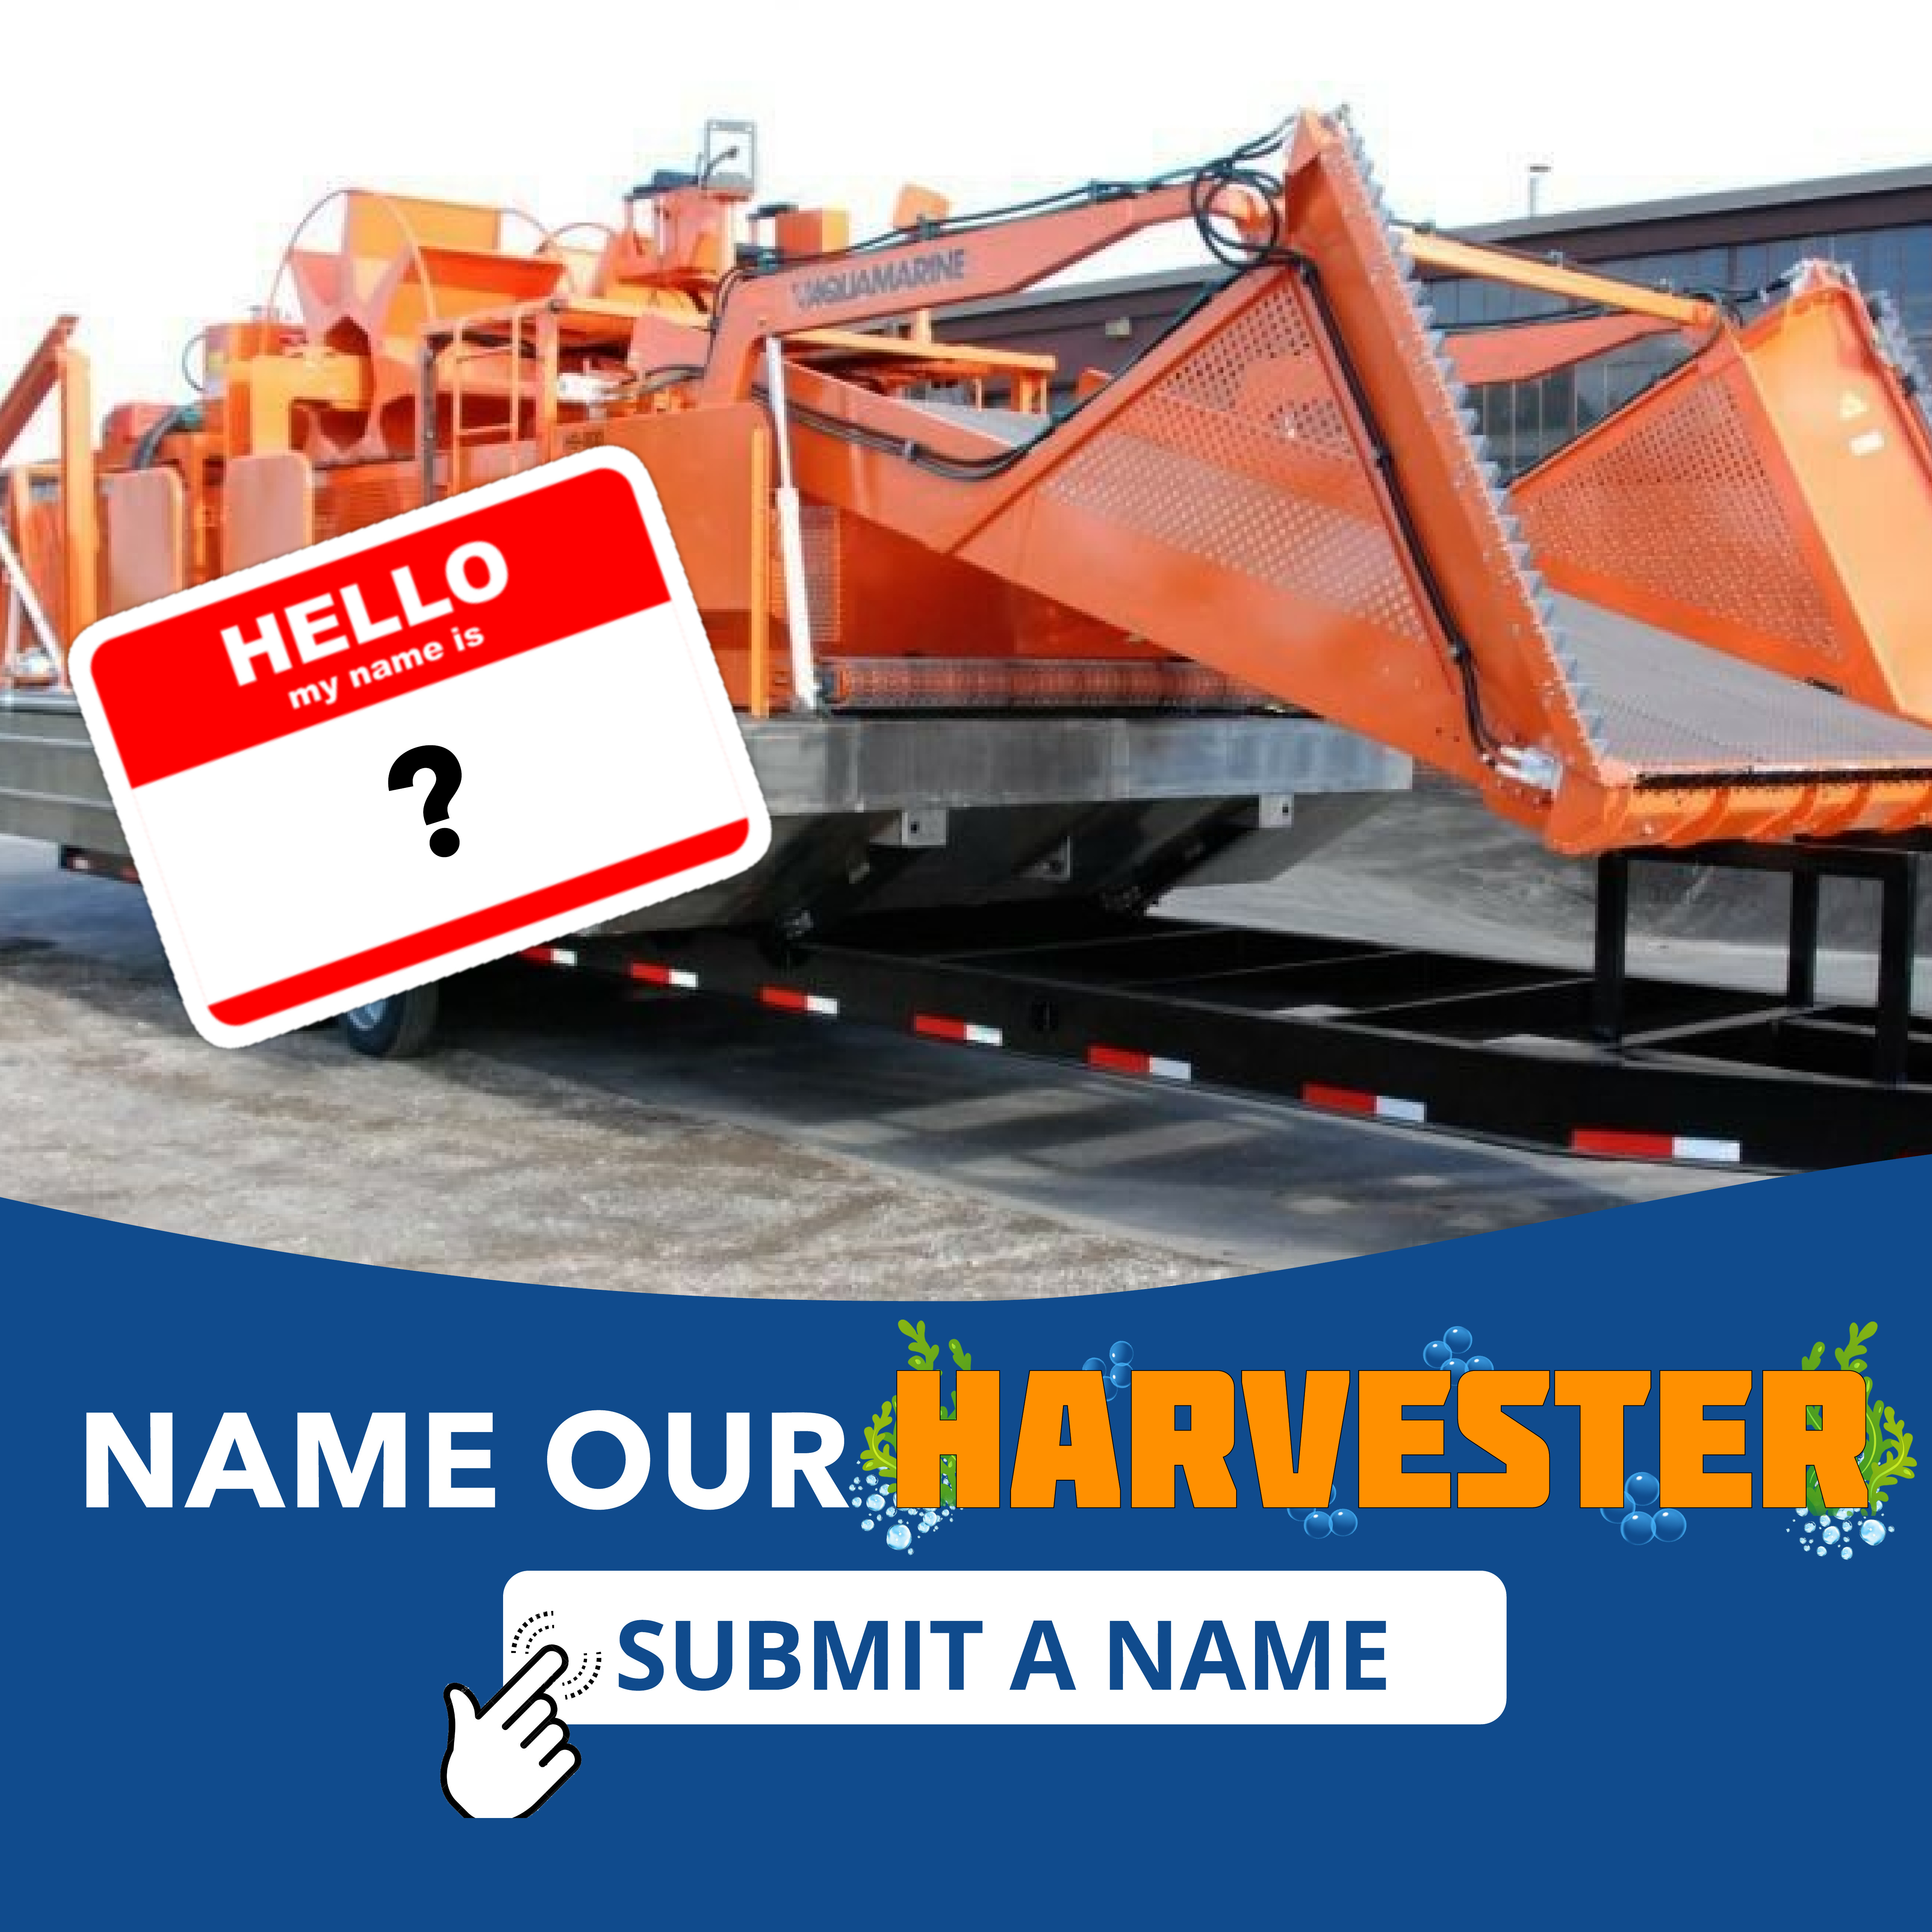 Name Our Harvester Contest information with a picture of a harvester